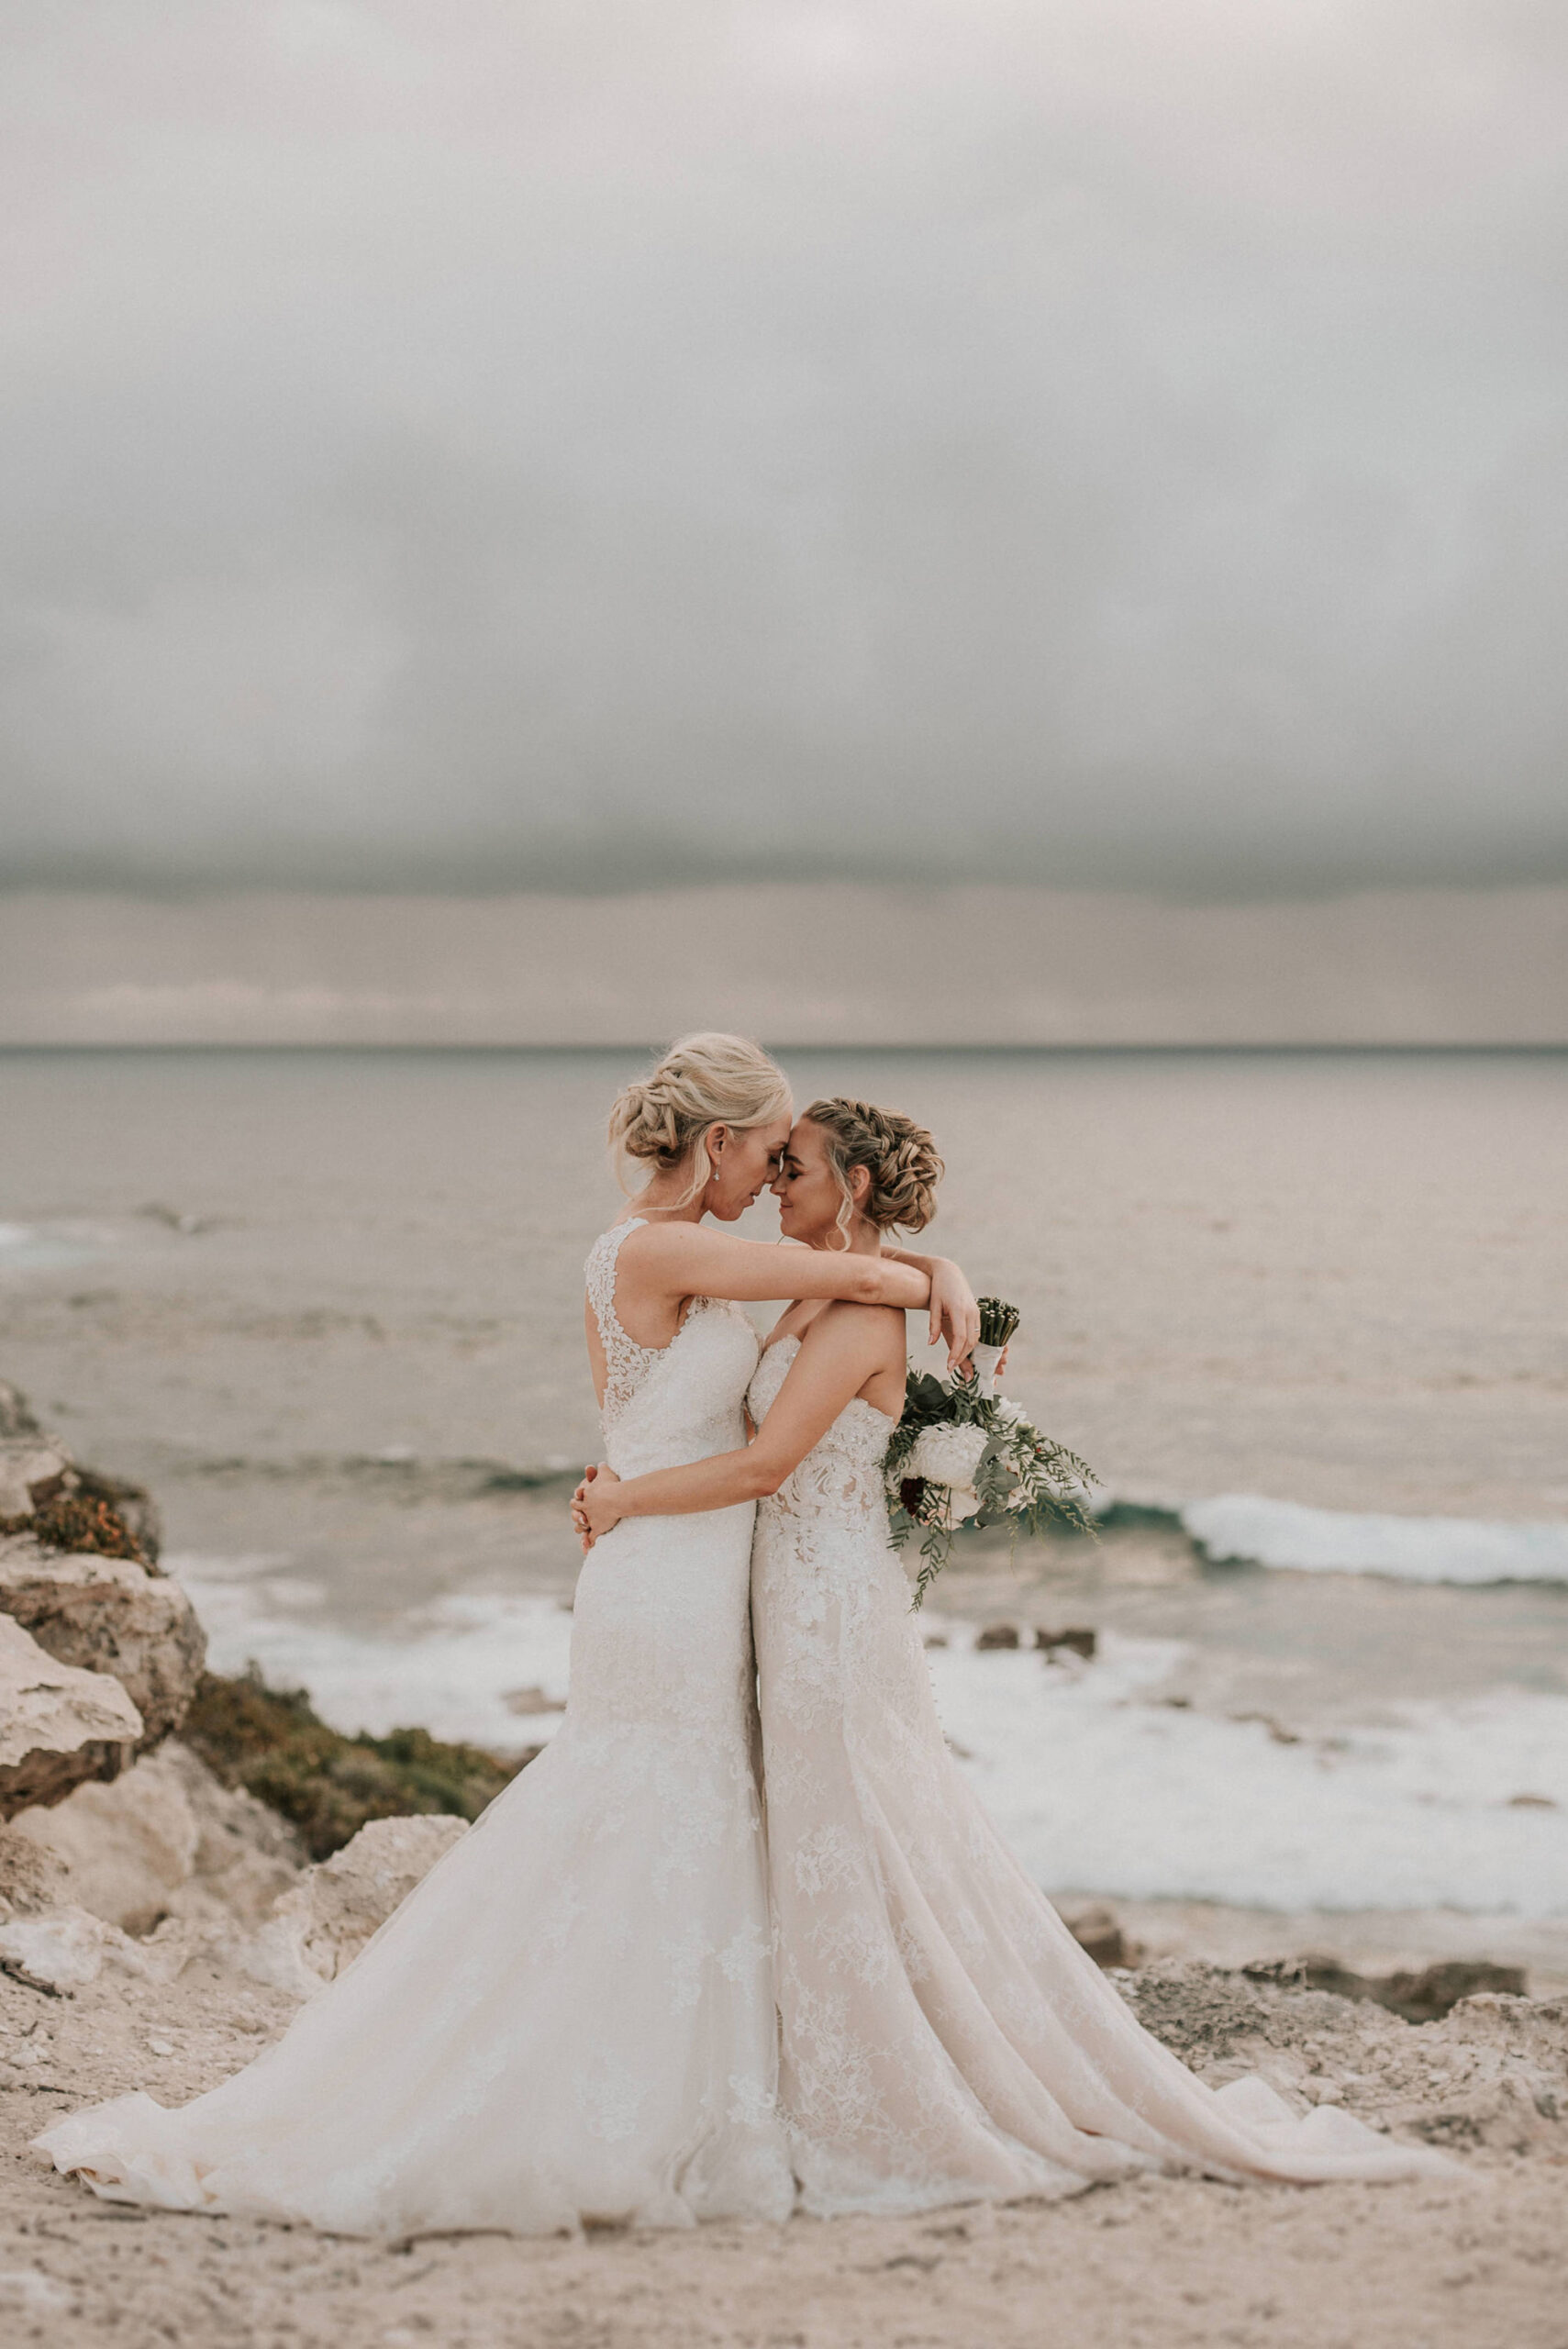 Lisa Vanessa Shannon Stent Images Rustic Relaxed Wedding 036 scaled